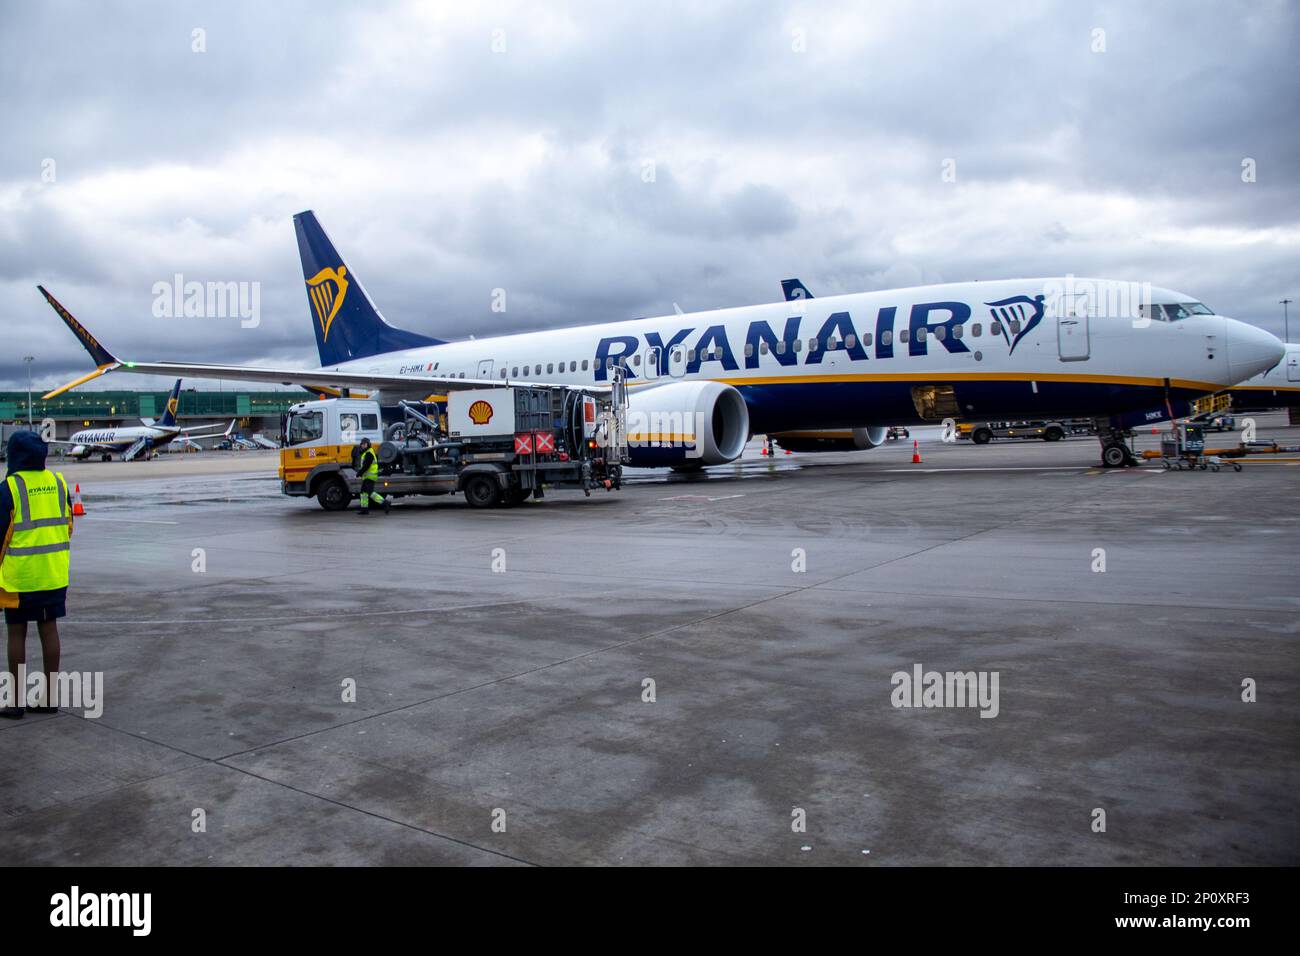 RyanAir plane at Stansted airport. Credit: Sinai Noor / Alamy Stock Photo Stock Photo